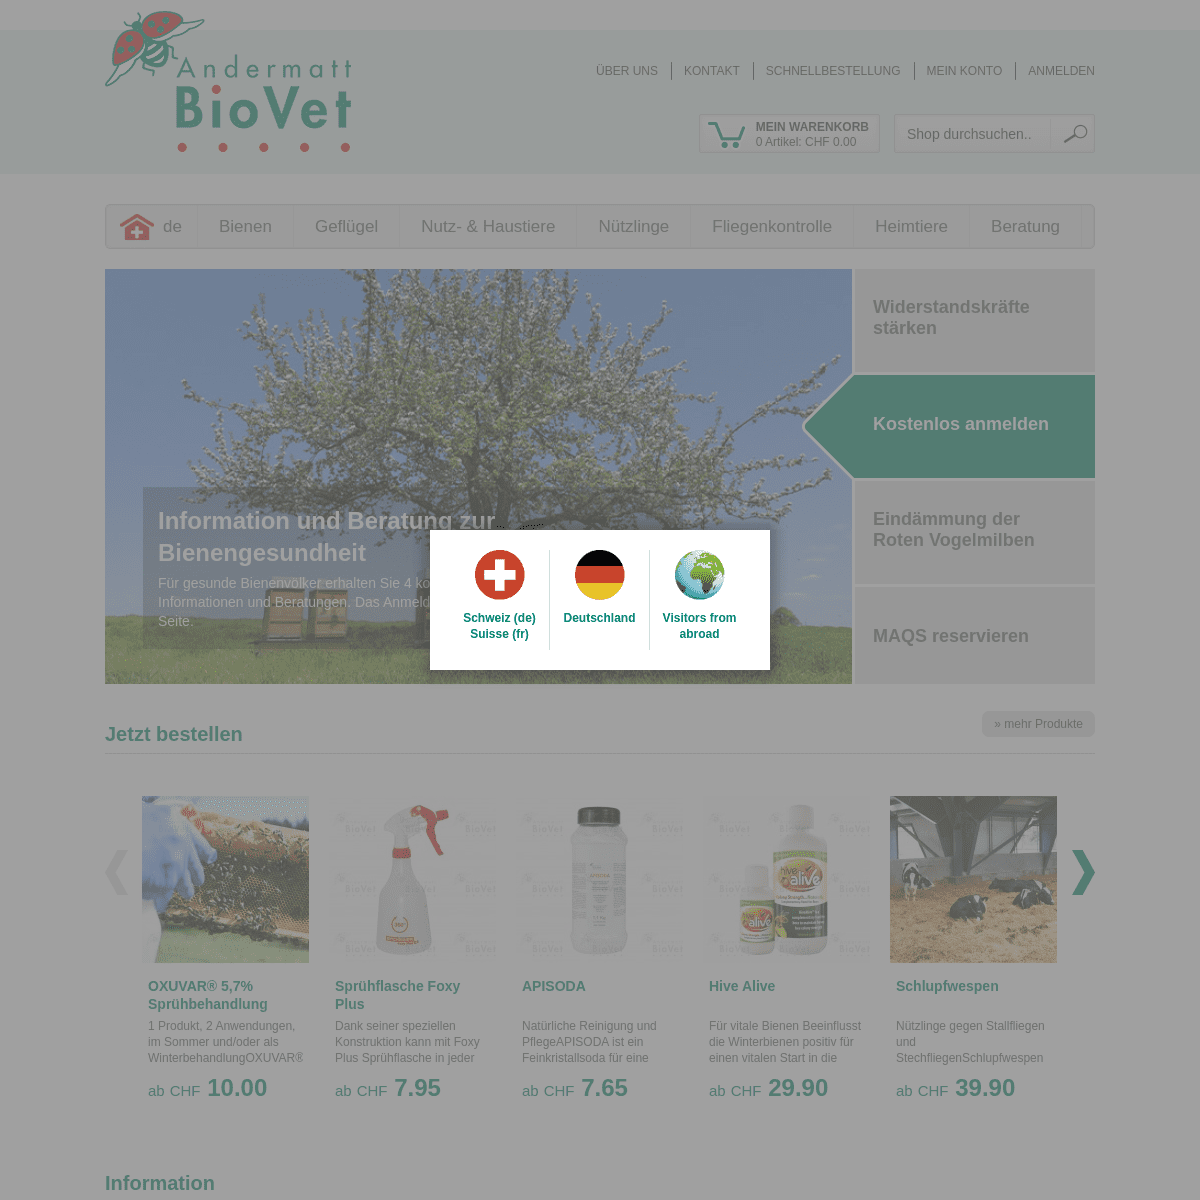 A complete backup of biovet.ch